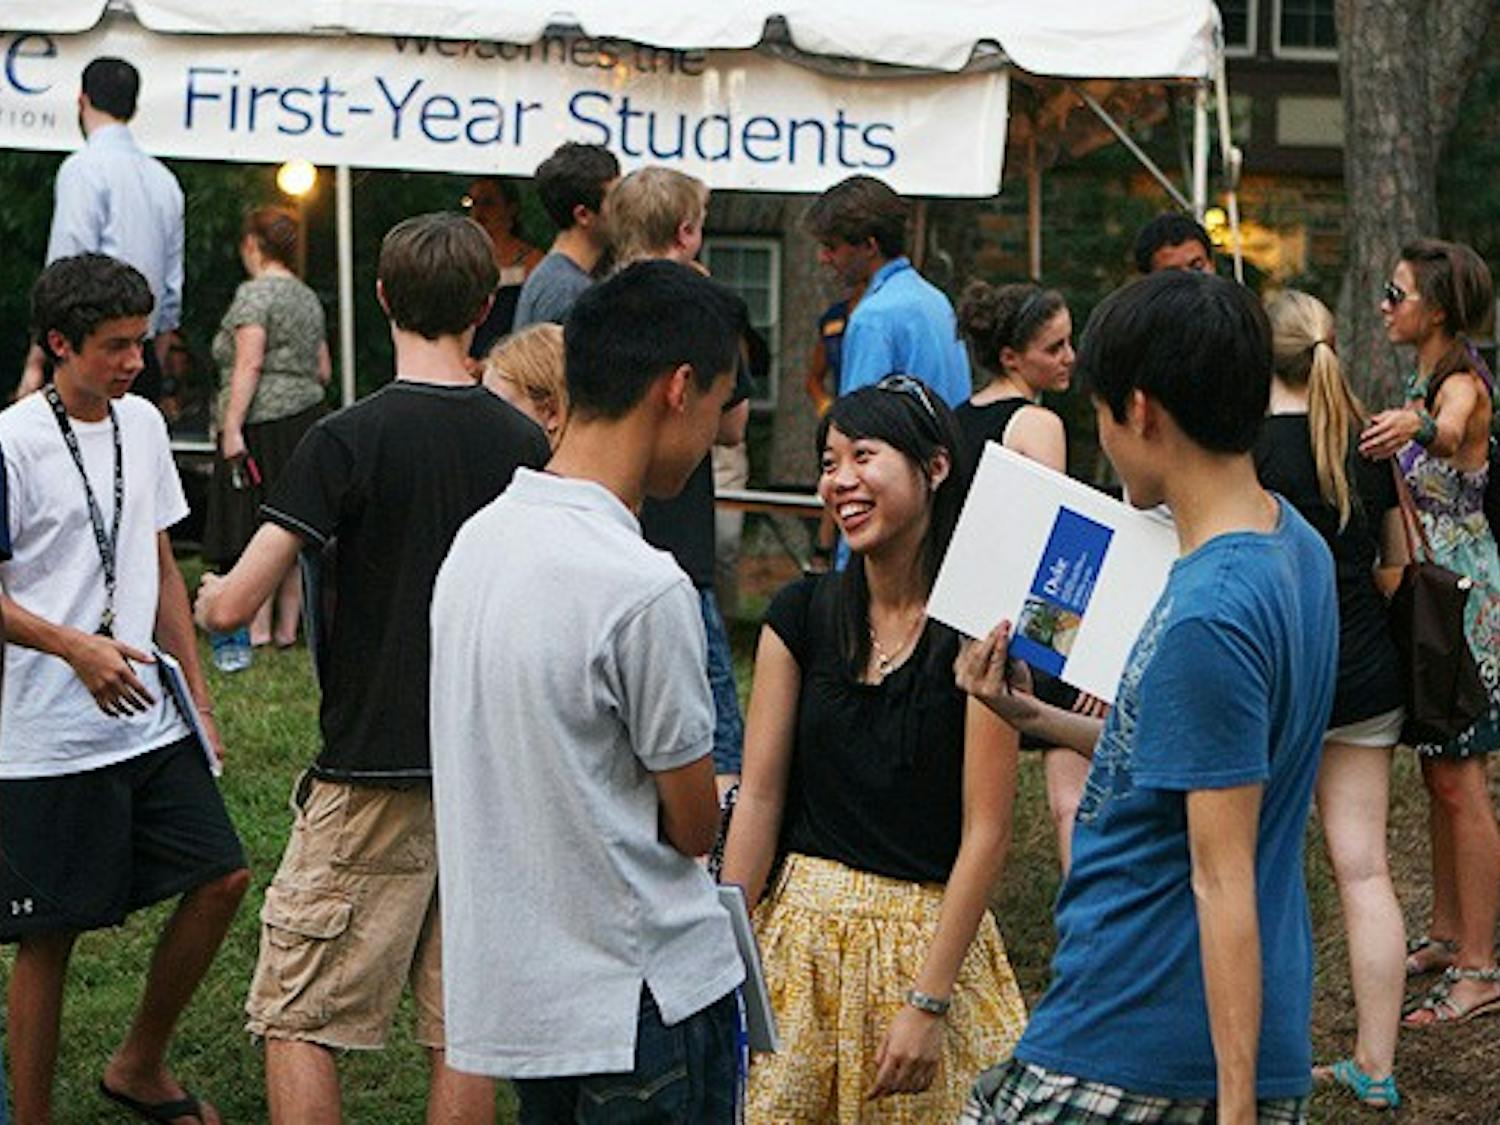 Students, faculty and alumni gathered for free food, drinks and gifts on Chapel Drive Monday for the Forever Duke Block Party, held annually on the first day of classes.